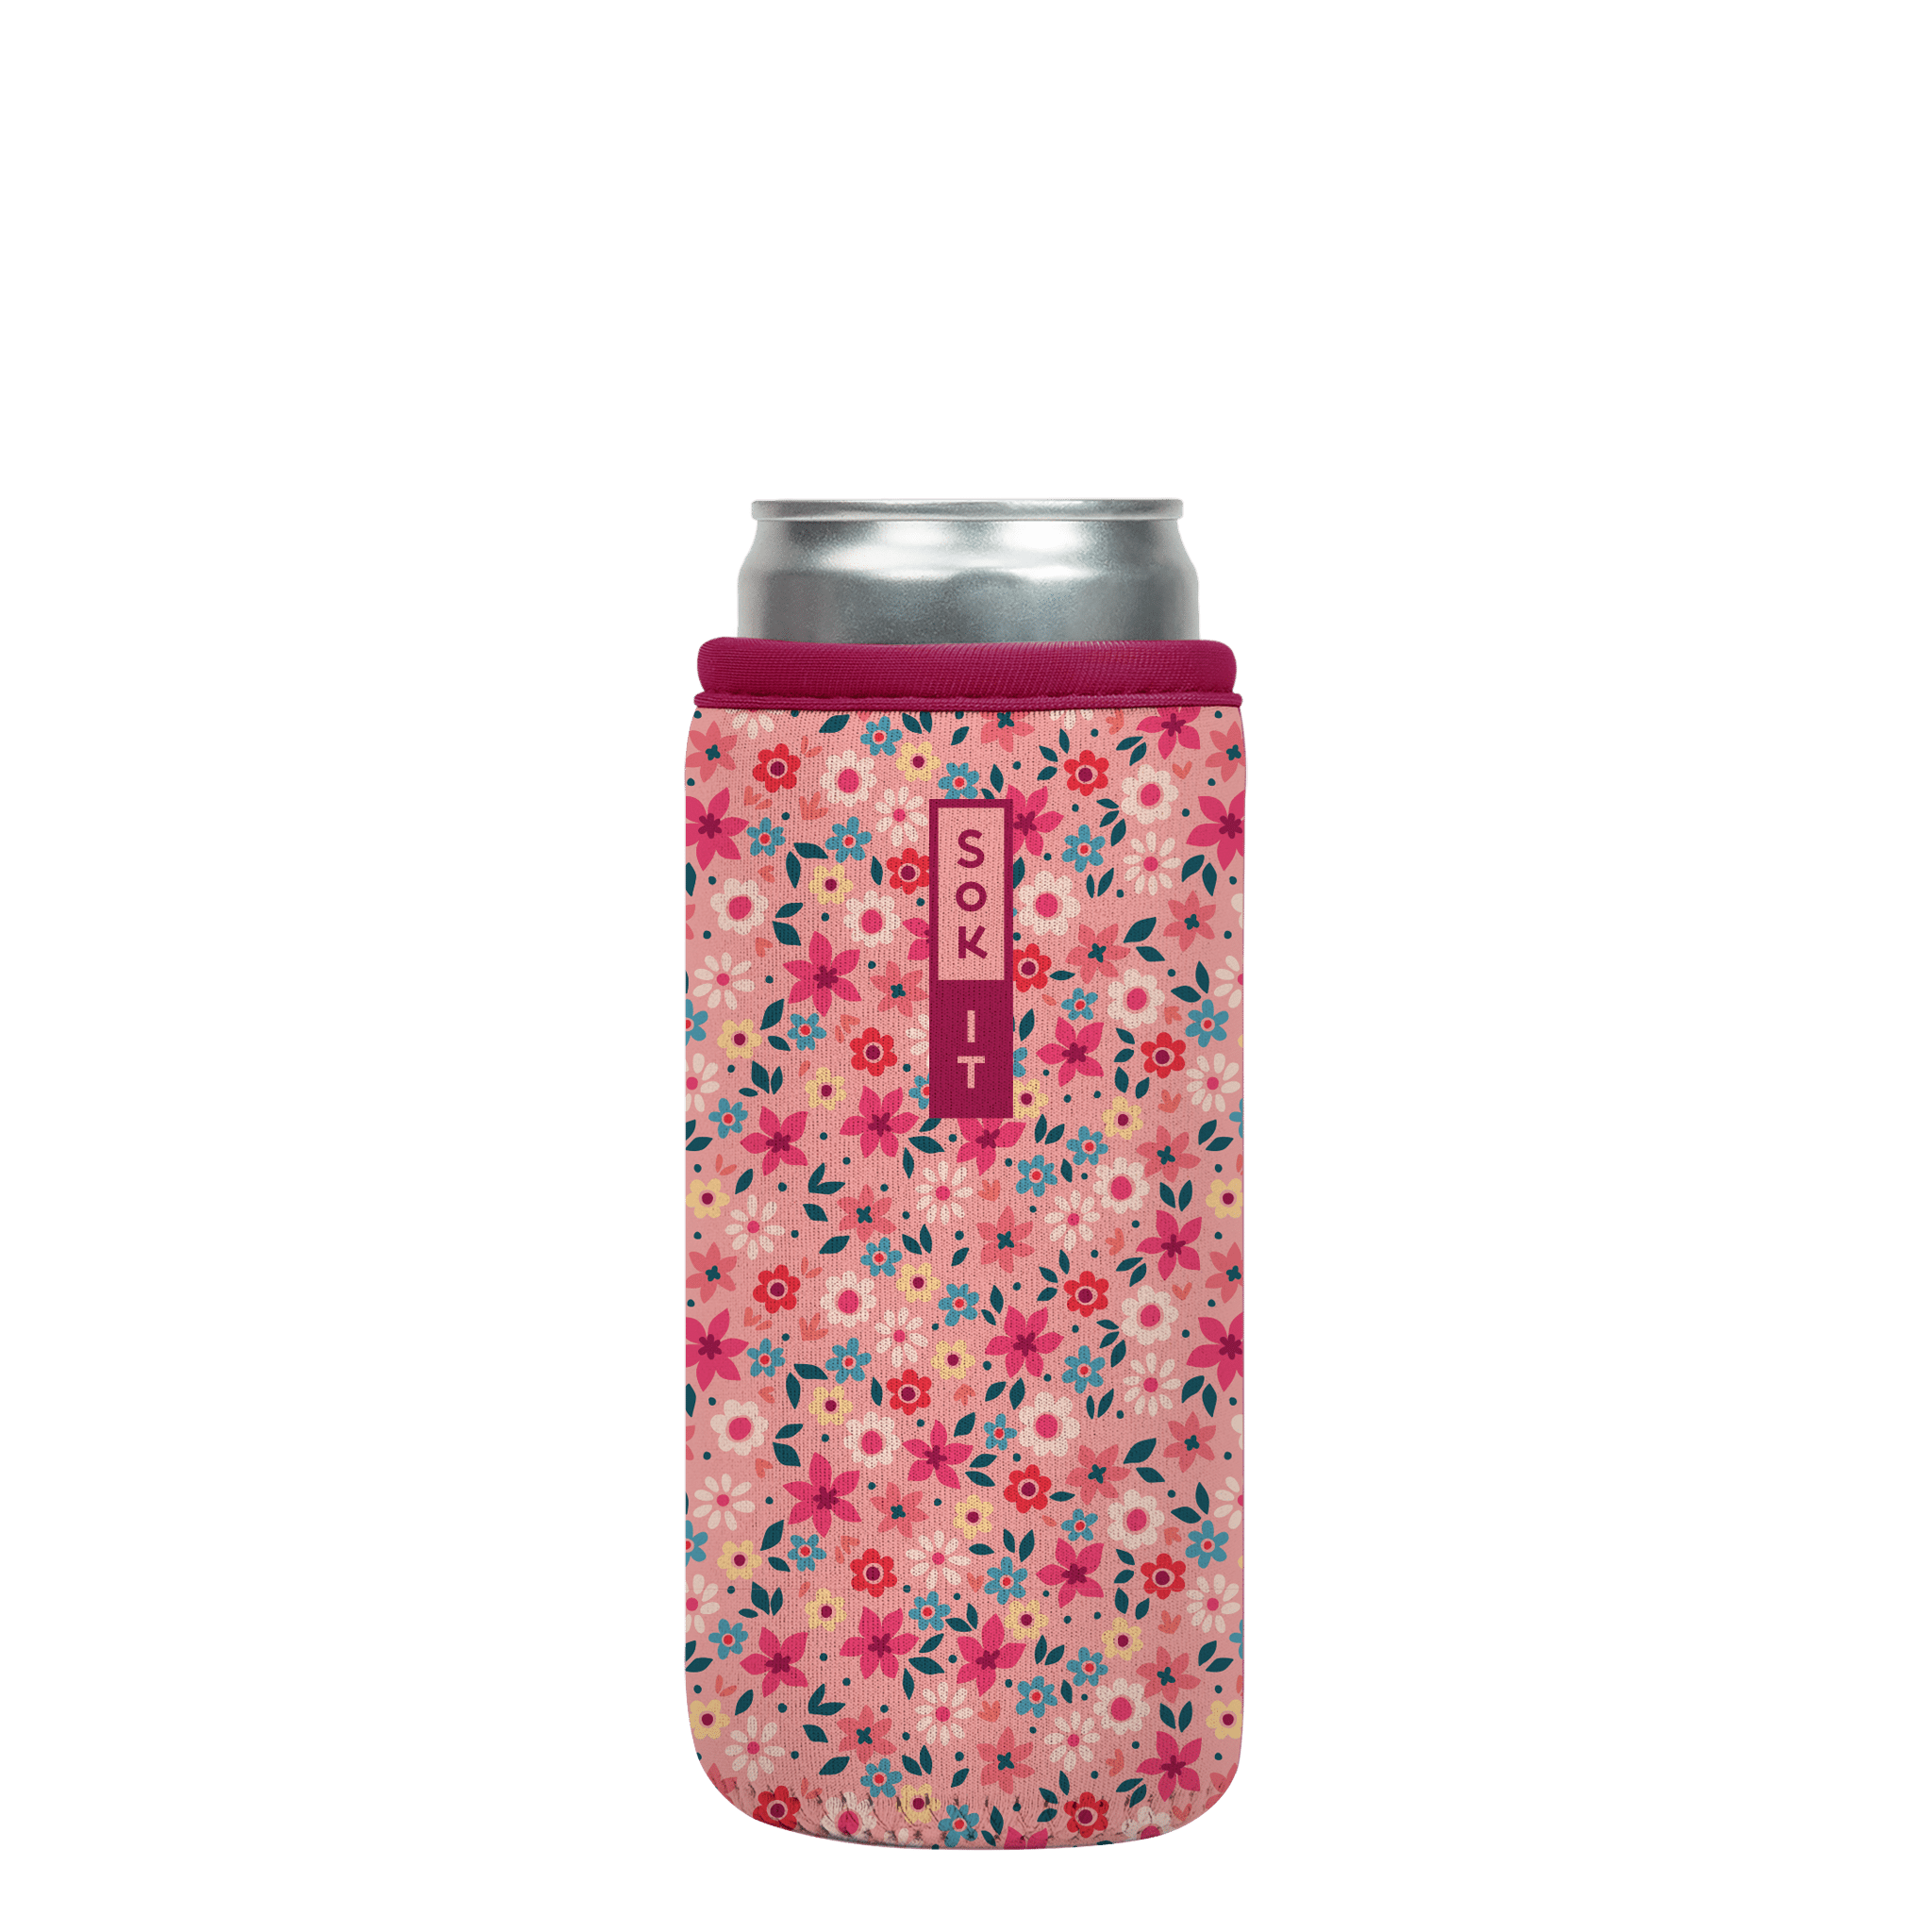 CanSok-Floral Spring Bouquet 12oz Slim Can